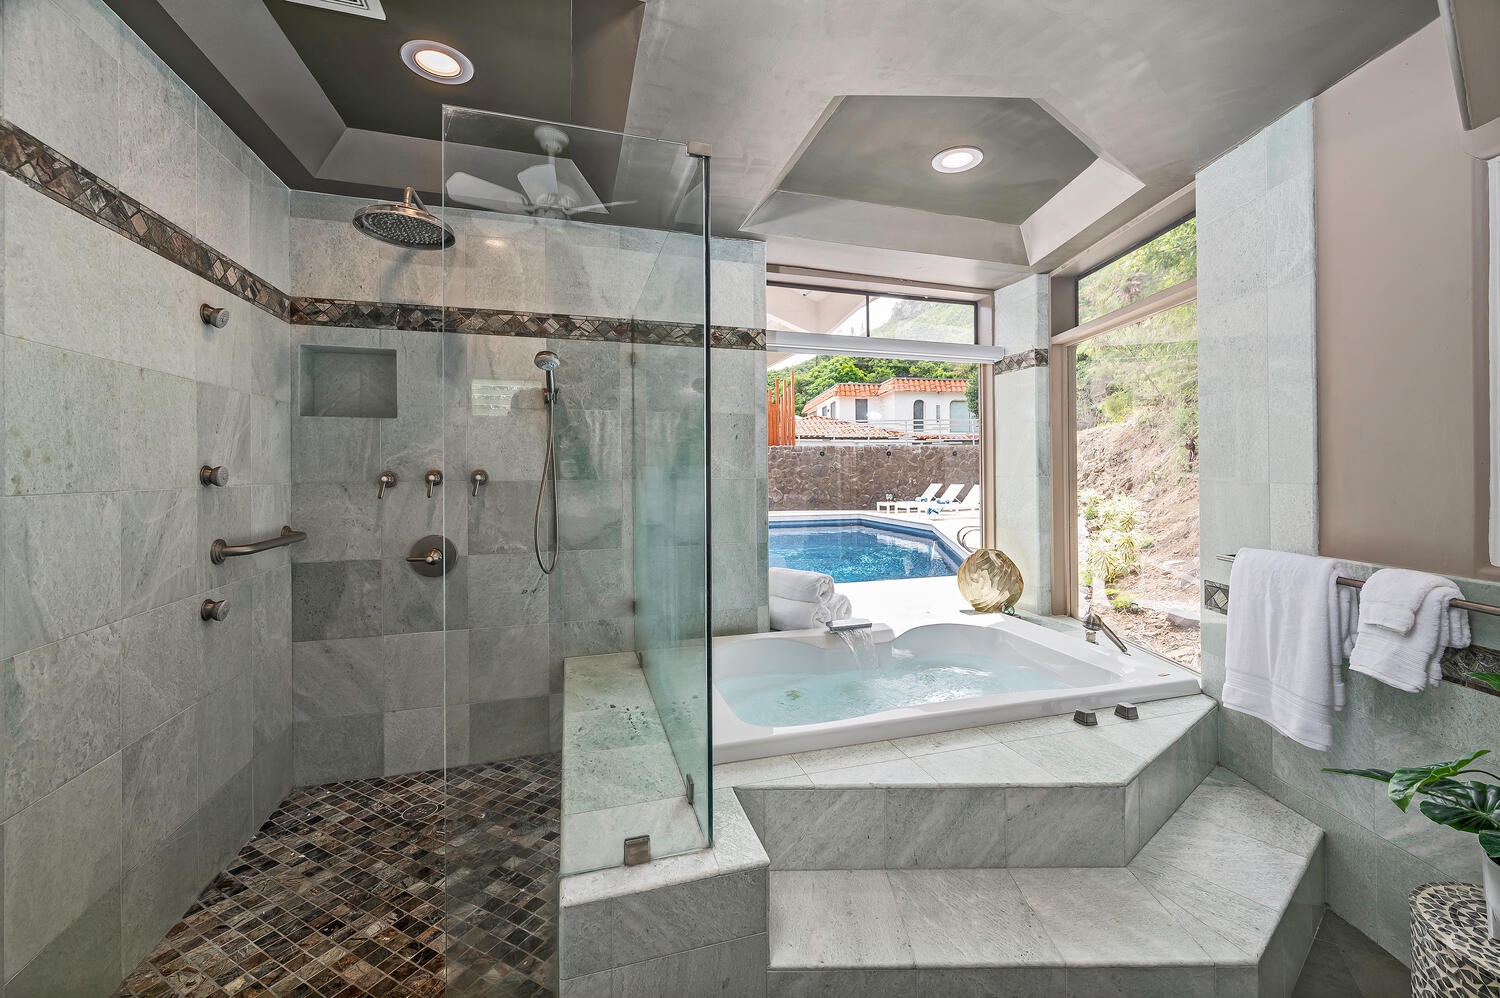 Kailua Vacation Rentals, Hale Lani - Walk-in shower and soaking tub in the primary ensuite